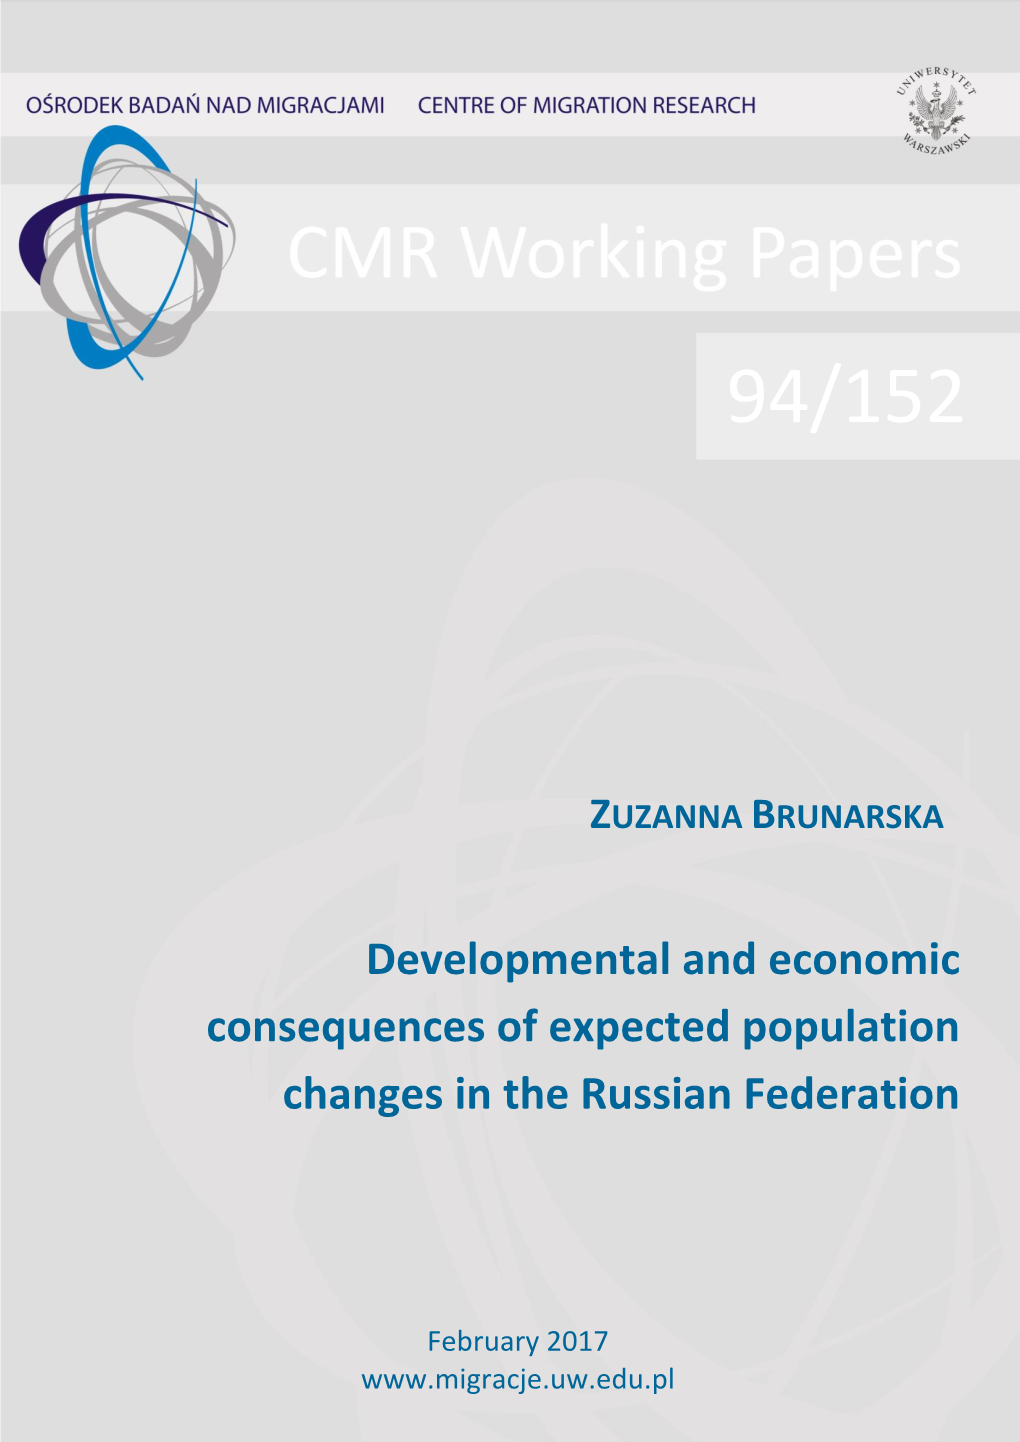 Migration and Futures of Ethnic Groups in the Russian Federation (MIGRUS